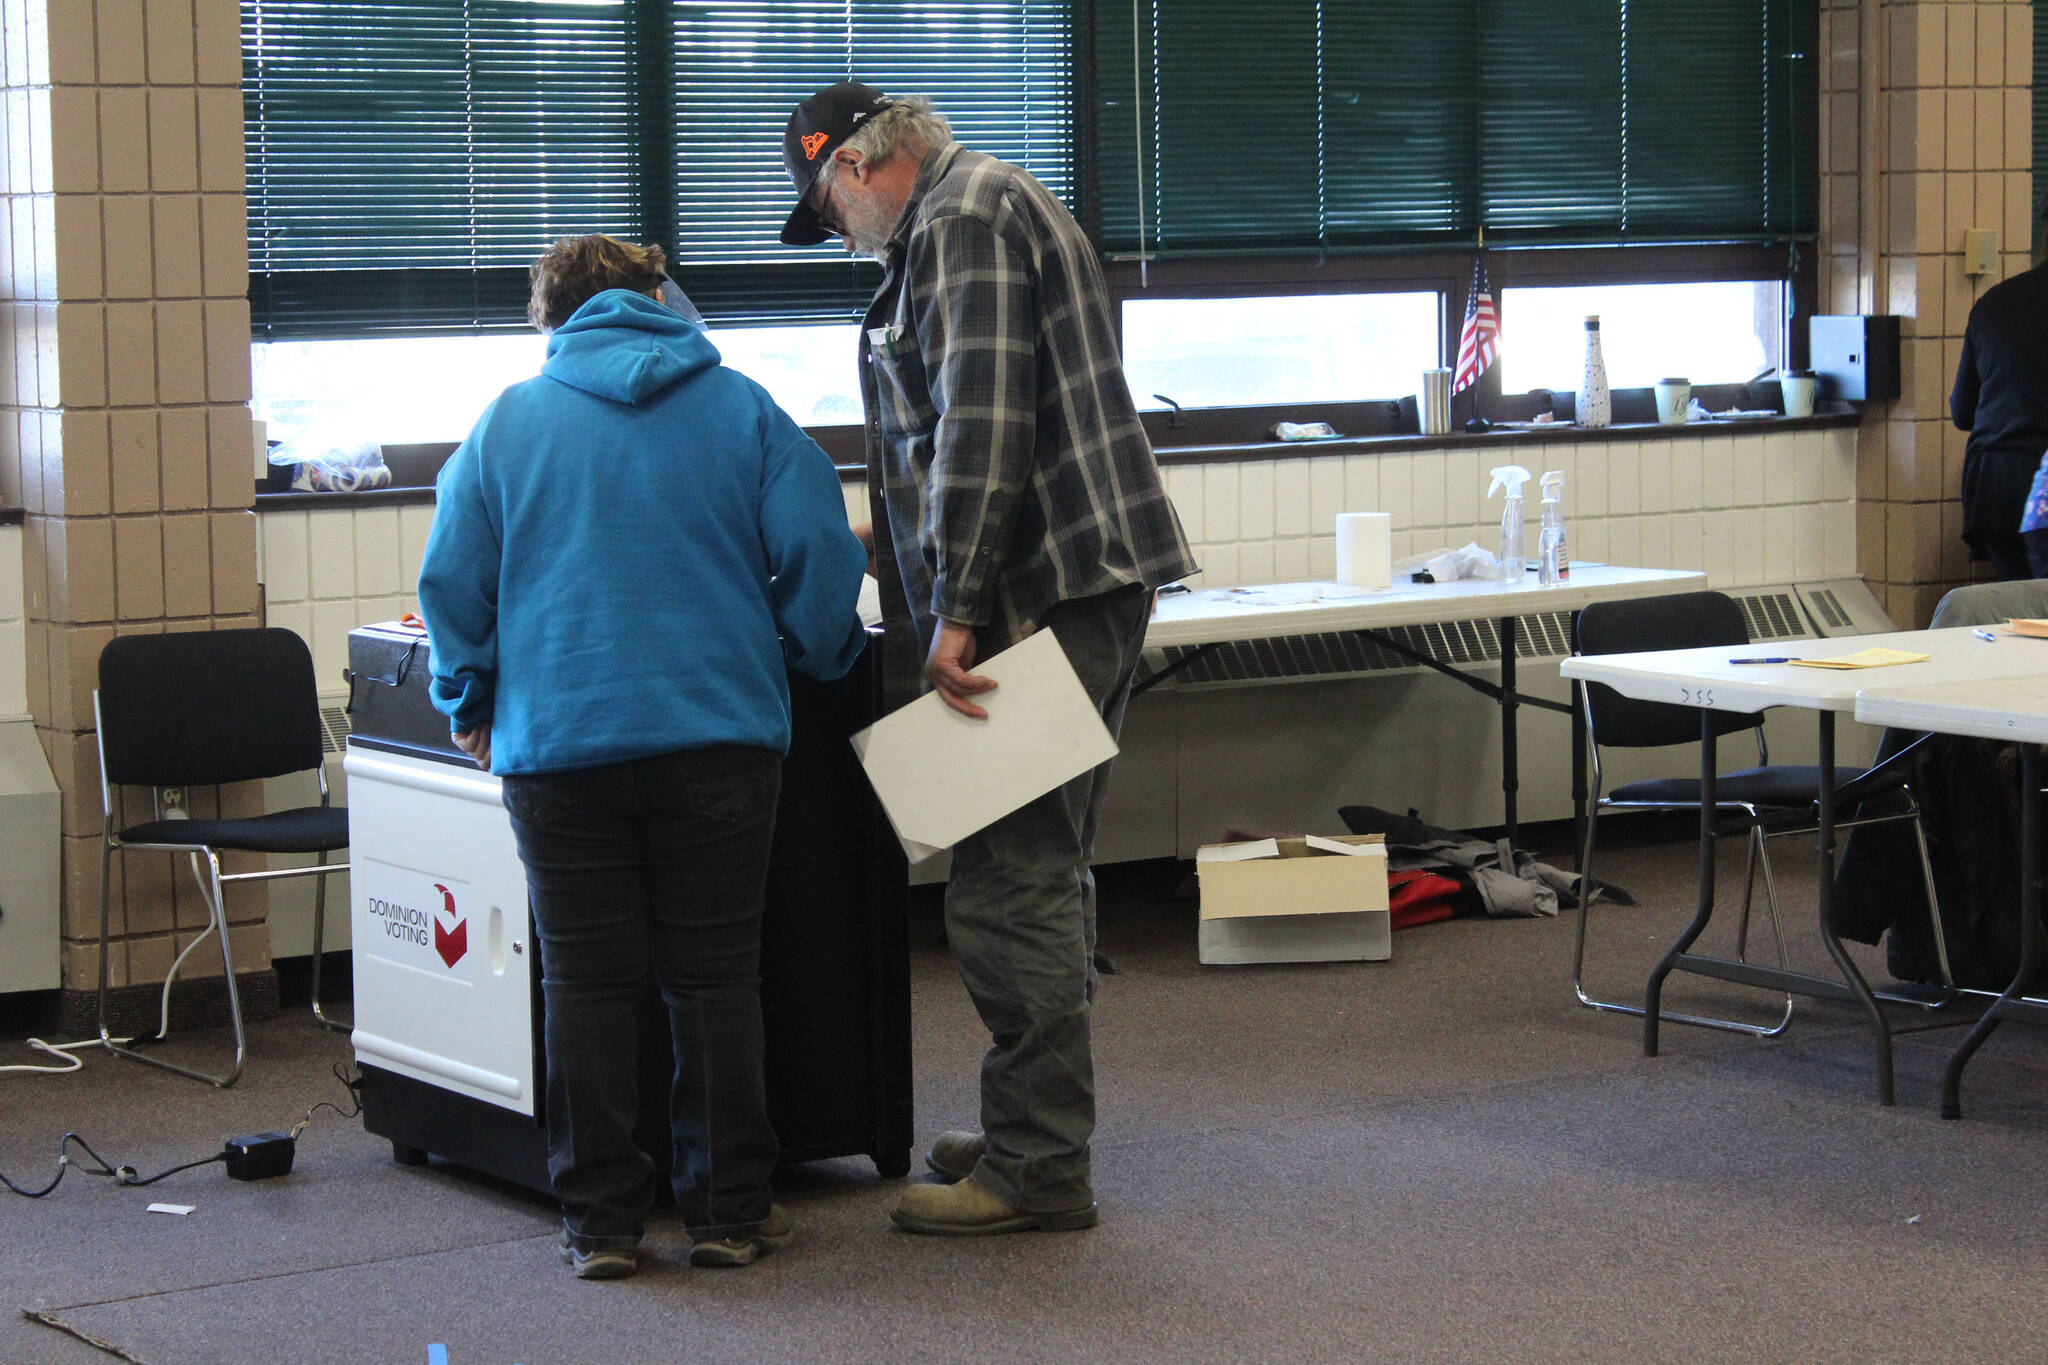 A poll worker helps a voter with his ballot at the Soldotna Regional Sports Complex on Tuesday, Nov. 3, 2020, in Soldotna, Alaska. (Photo by Ashlyn O’Hara/Peninsula Clarion)